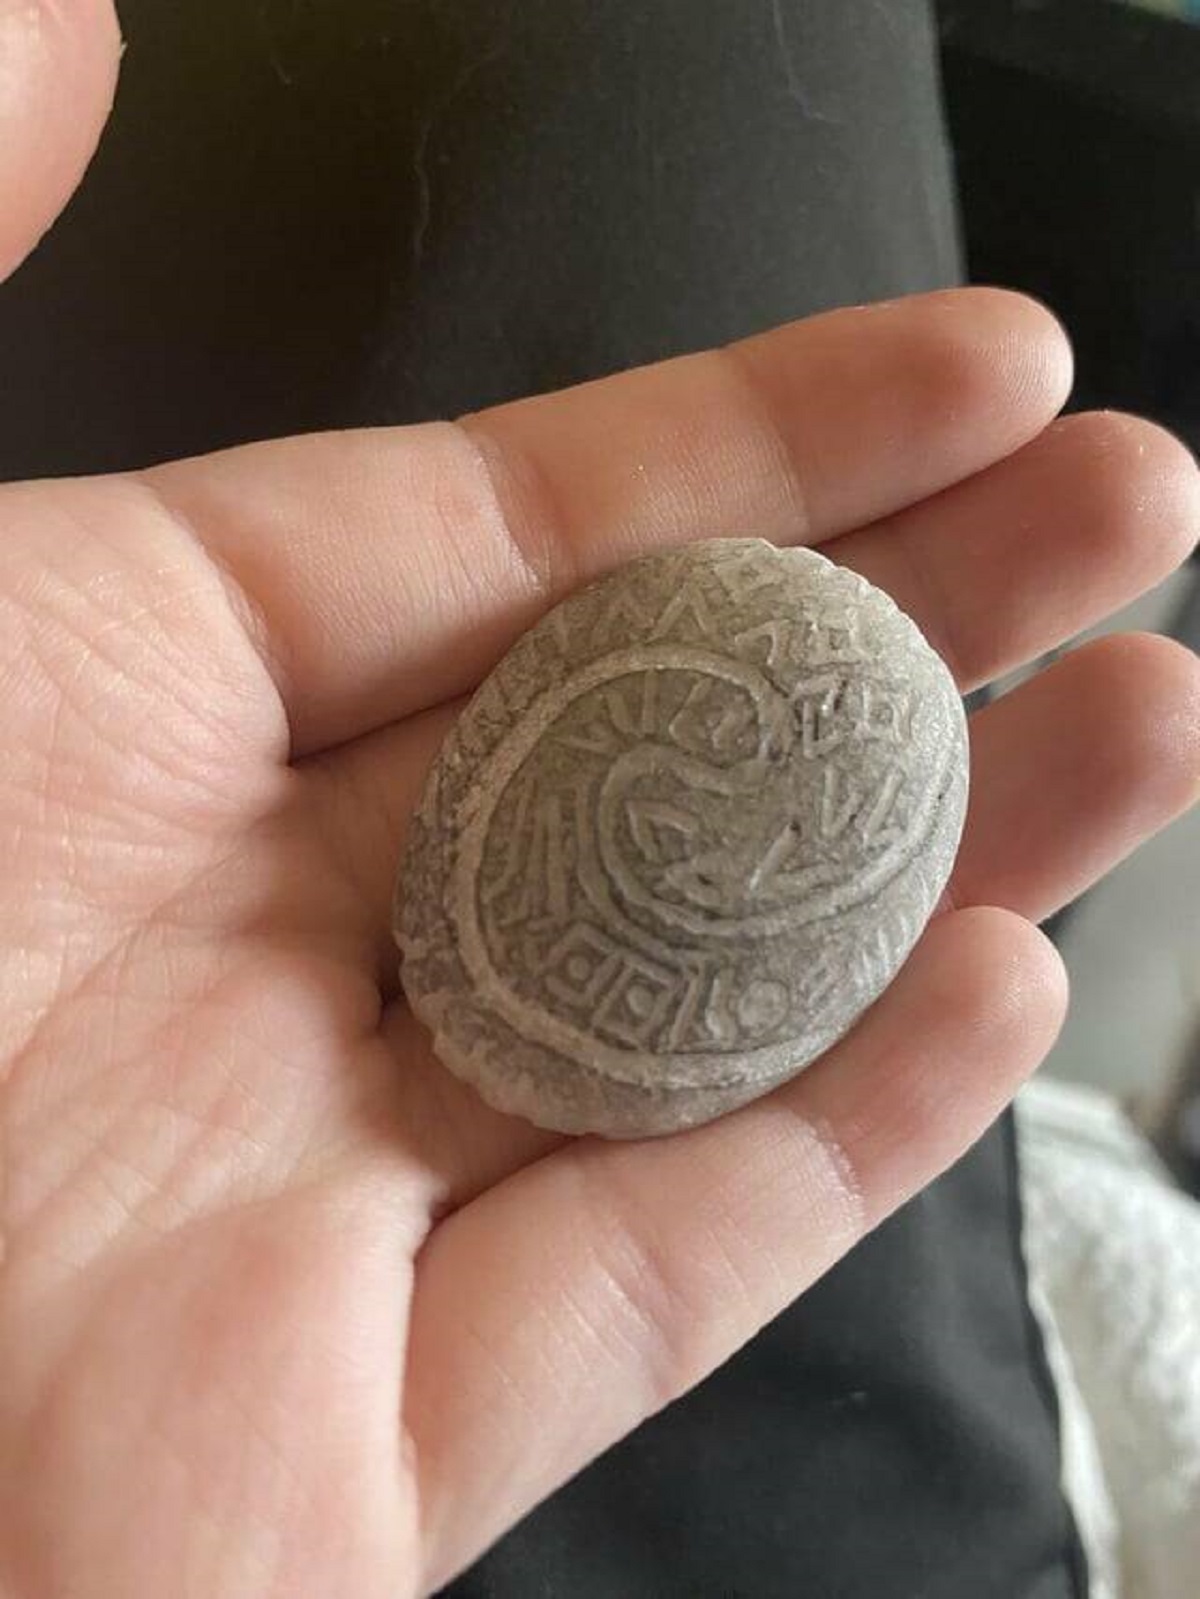 "Found this mysterious carved rock on the ground on my walk home from work the other day"